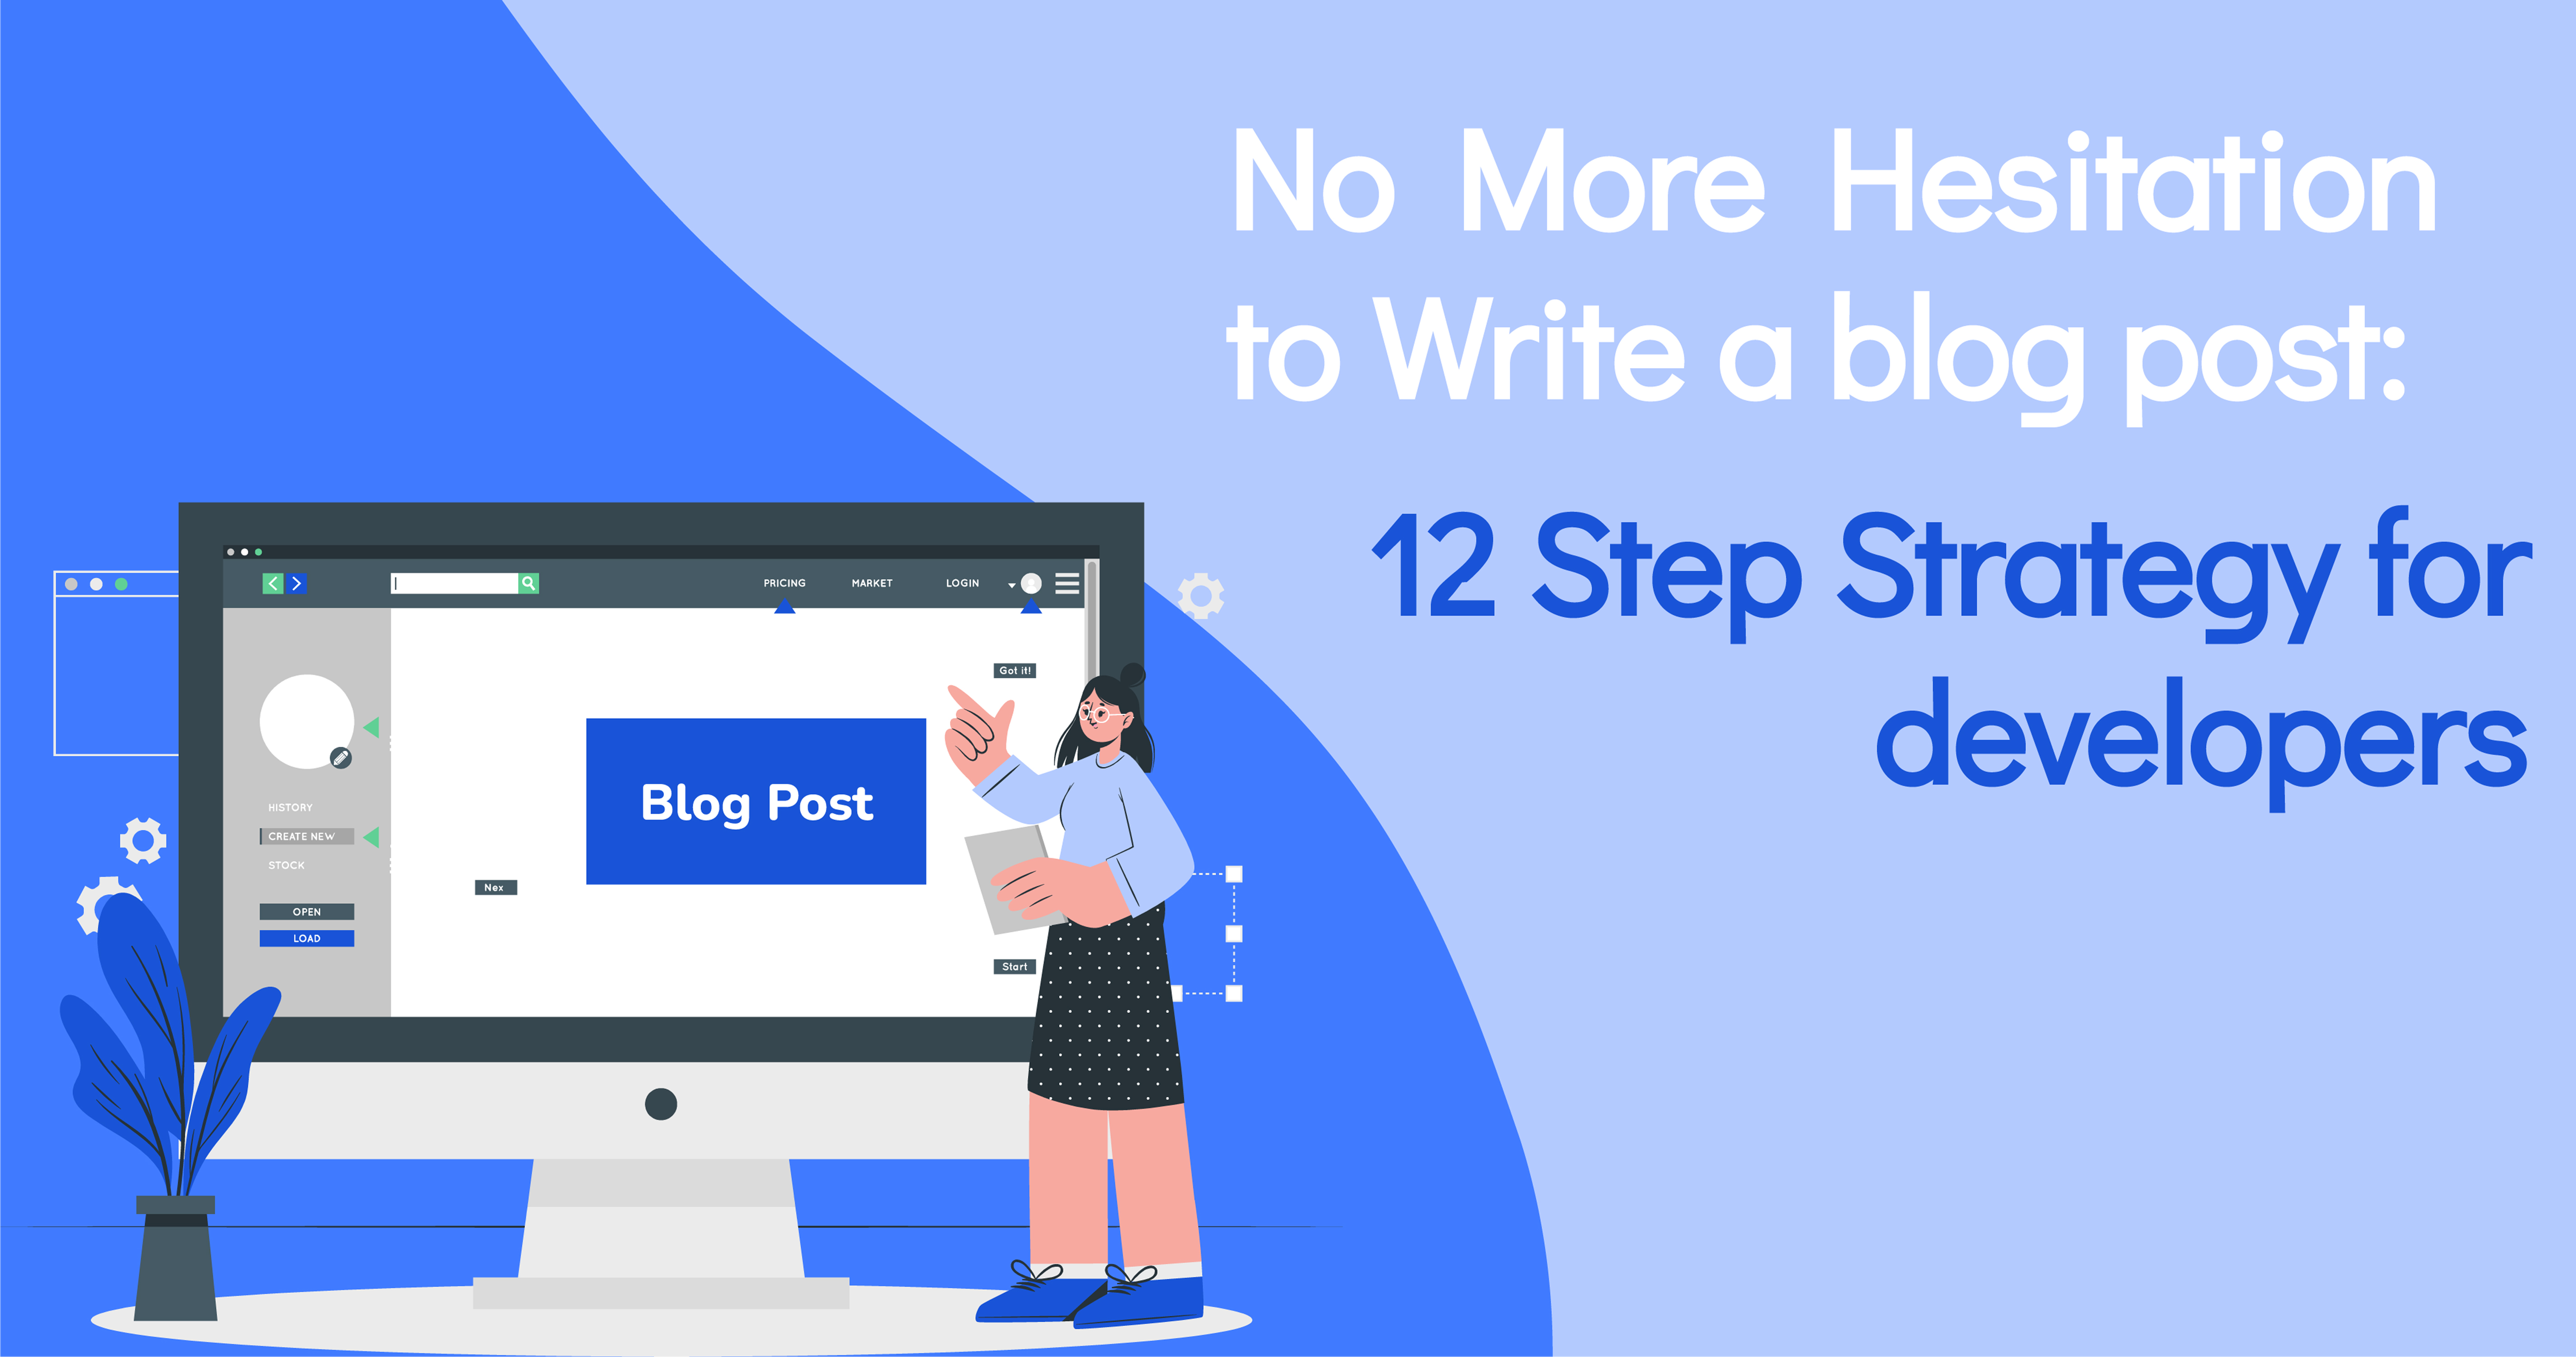 No More Hesitation to Write a blog post: 12 Step Strategy for developers